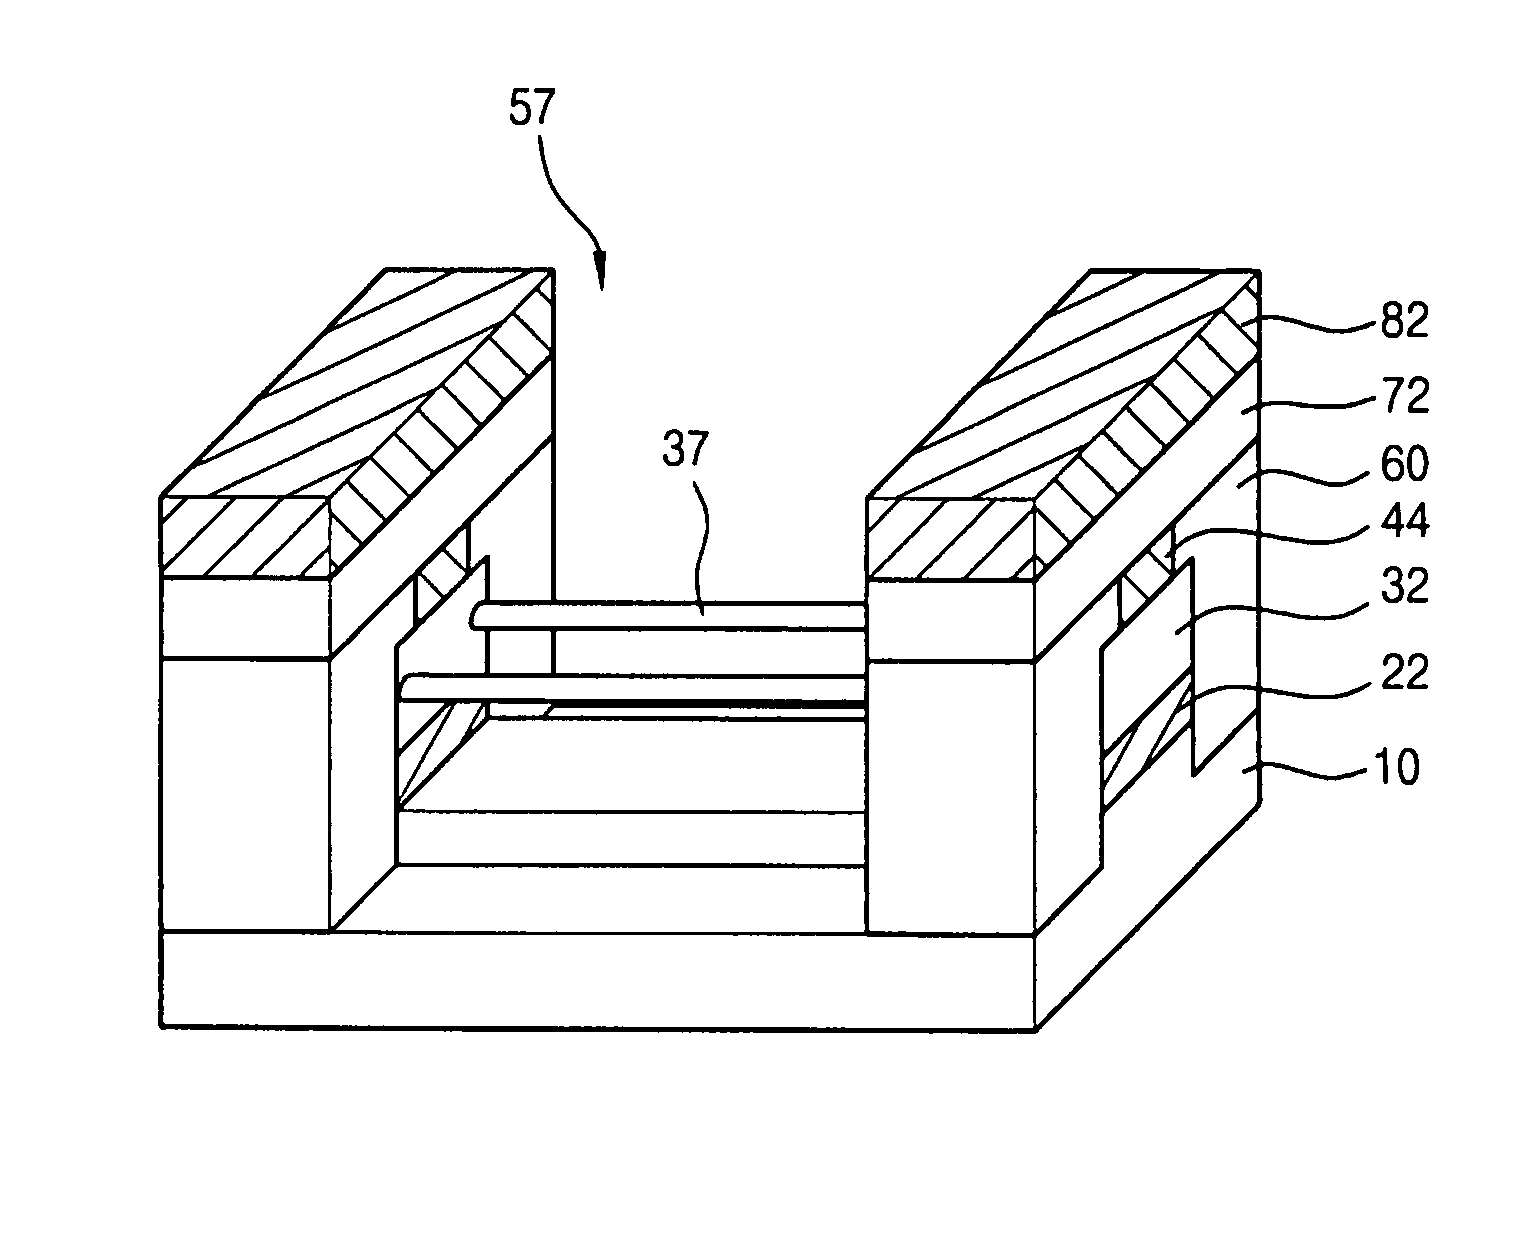 Gate-all-around type semiconductor device and method of manufacturing the same